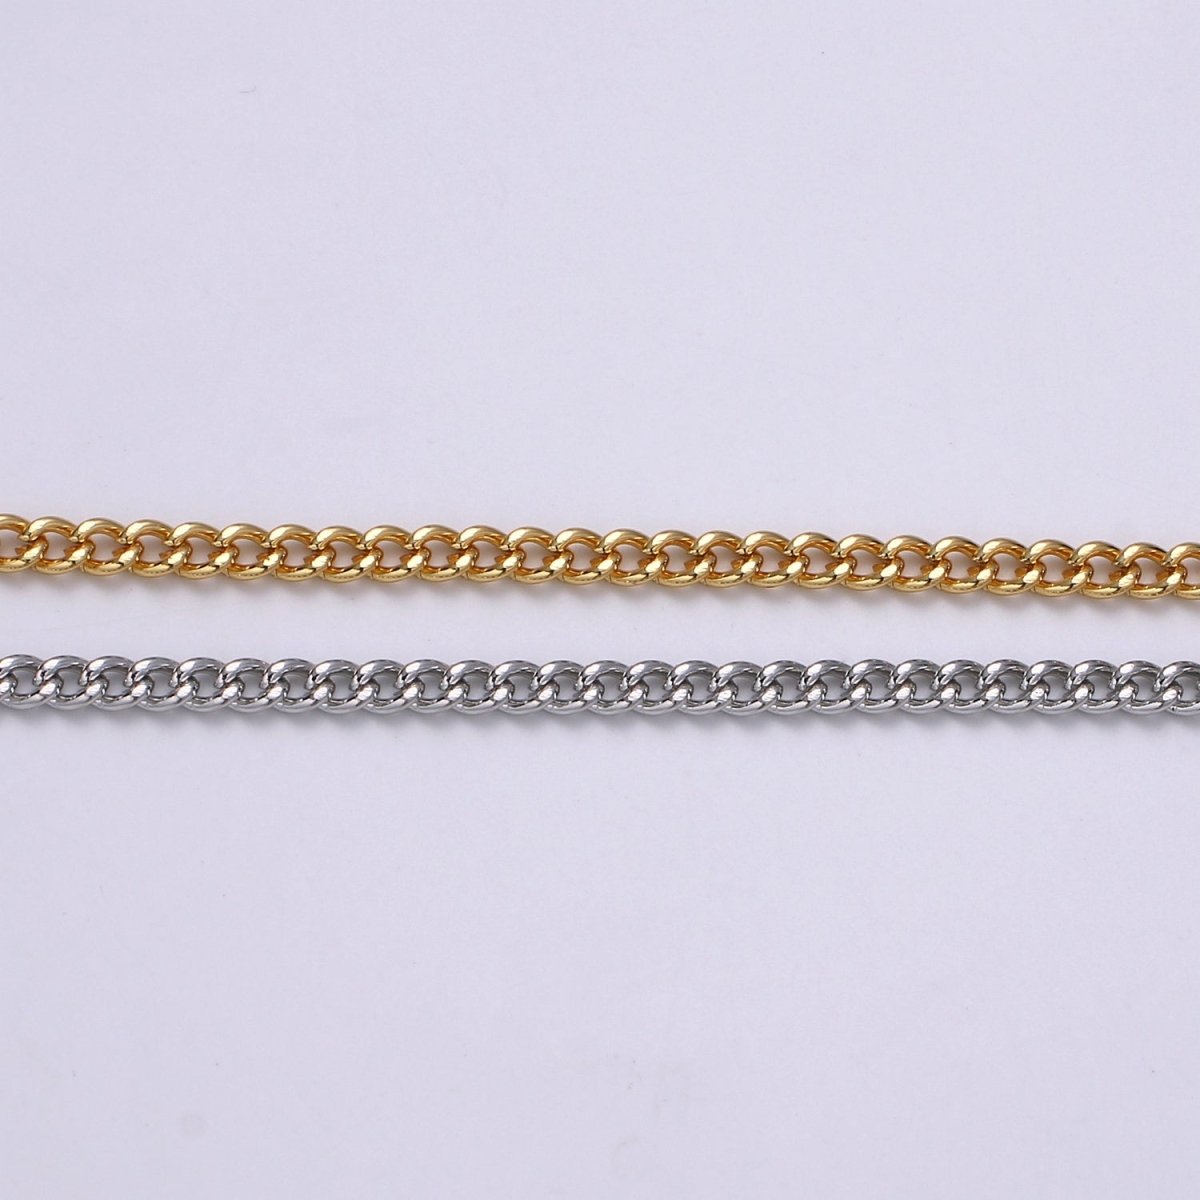 Gold CURB Chain by Yard, Wholesale Bulk Roll Chain For Jewelry Making, Width 2.9mm, 24K Gold Filled, White Gold Filled Matte Unfinished Chain | ROLL-497, ROLL-498 Clearance Pricing - DLUXCA